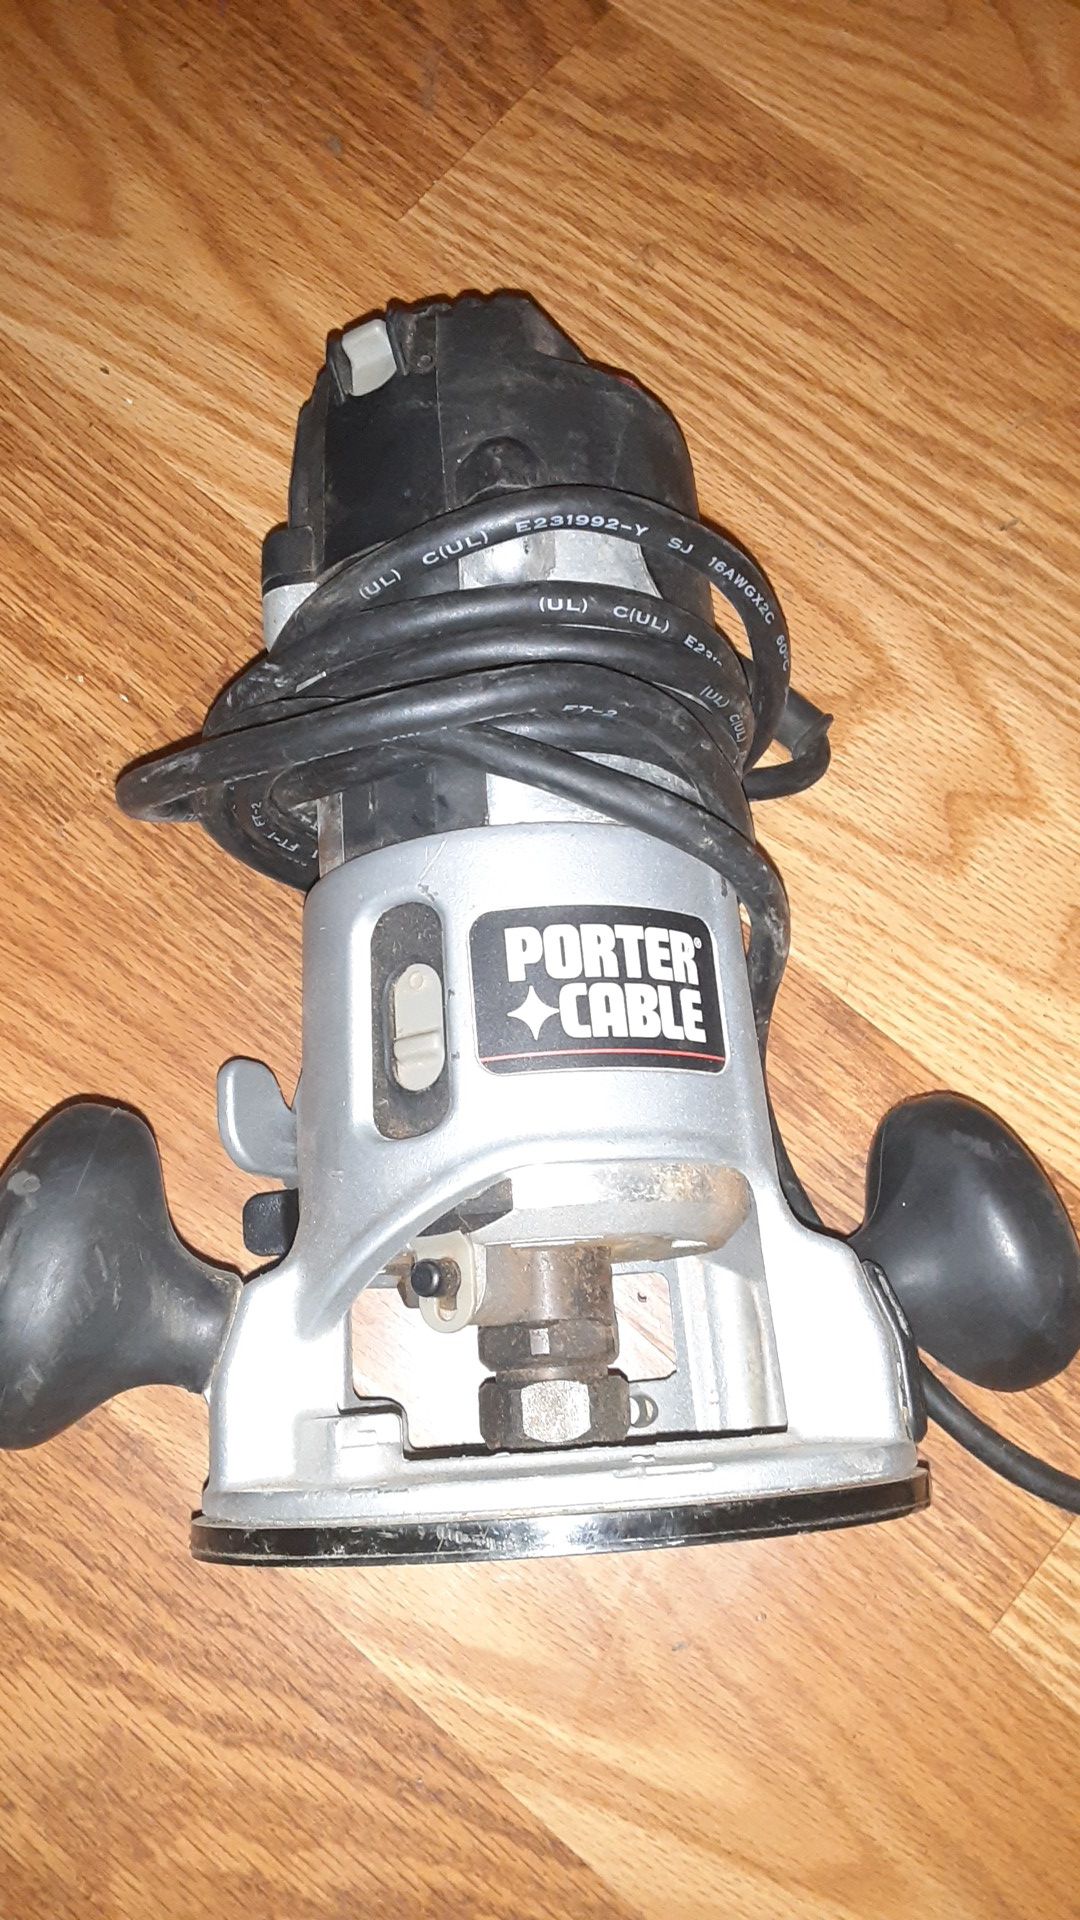 Porter cable 890 heavy duty router